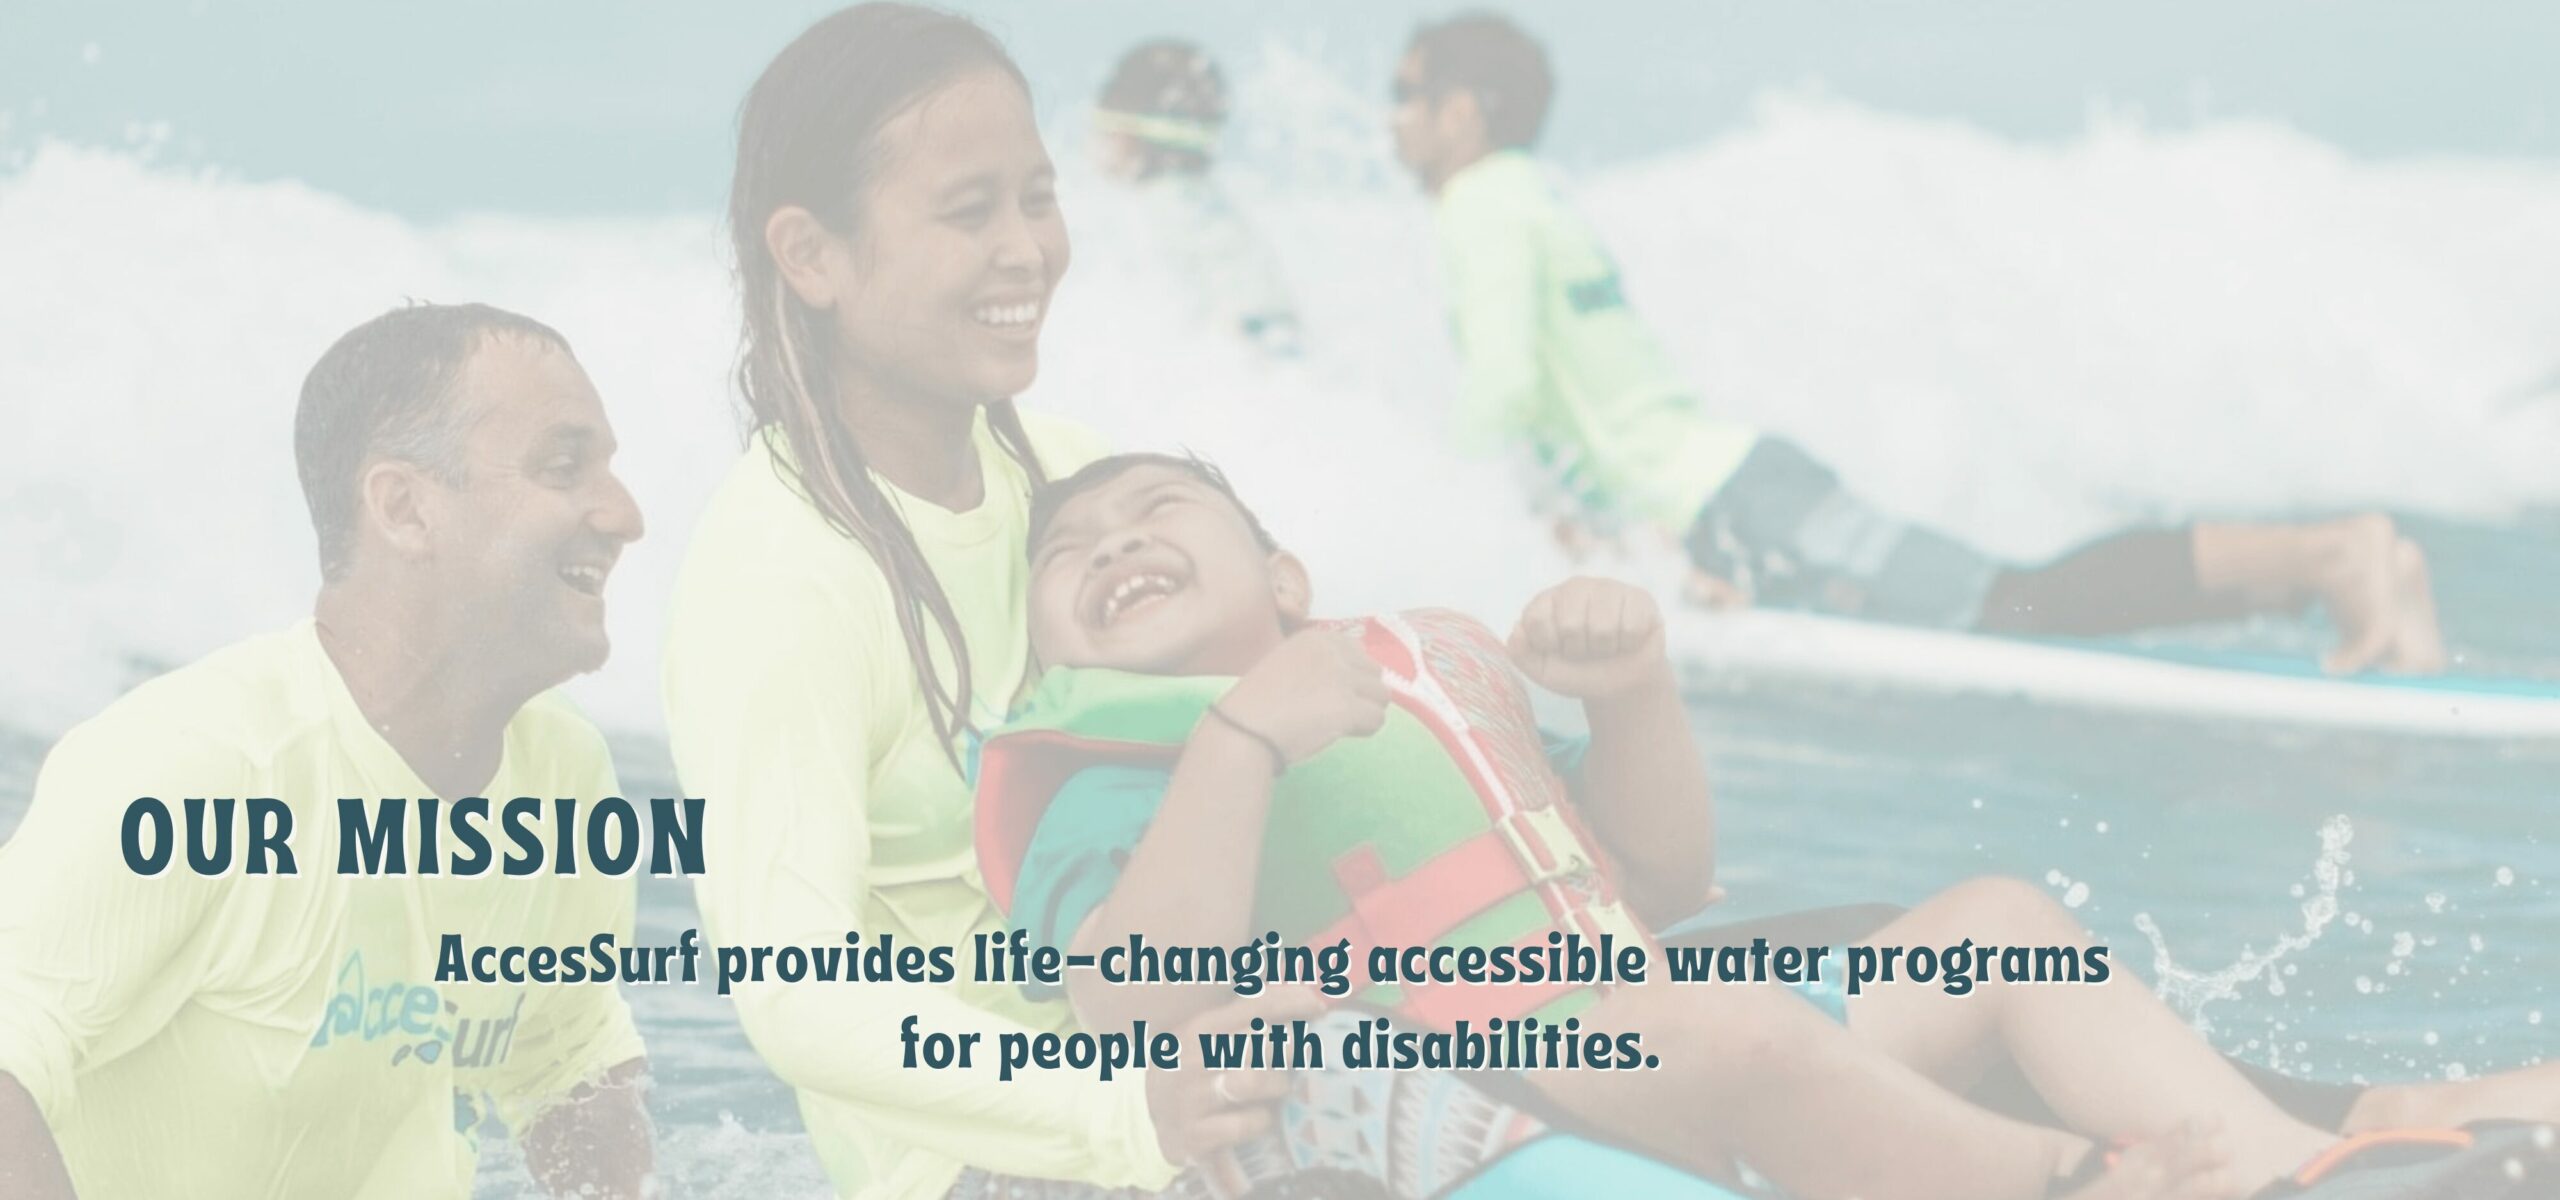 Our Mission: AccesSurf provides life-changing accessible water programs for people with disabilities.